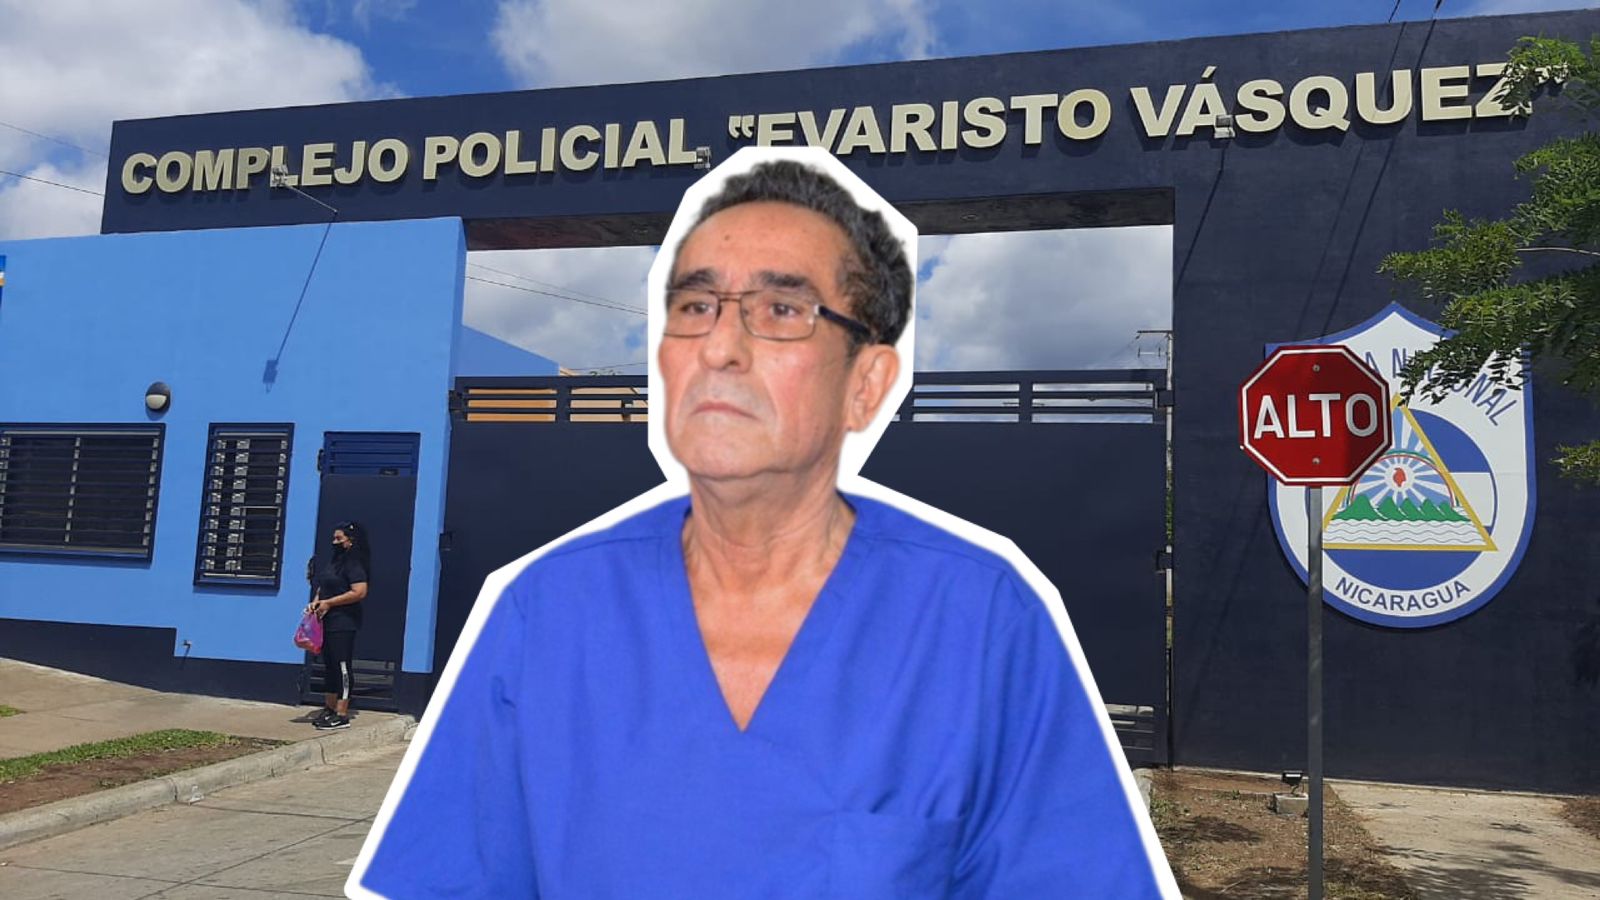 Irving Larios completes 13 days on hunger strike and 480 detained in "El Chipote"